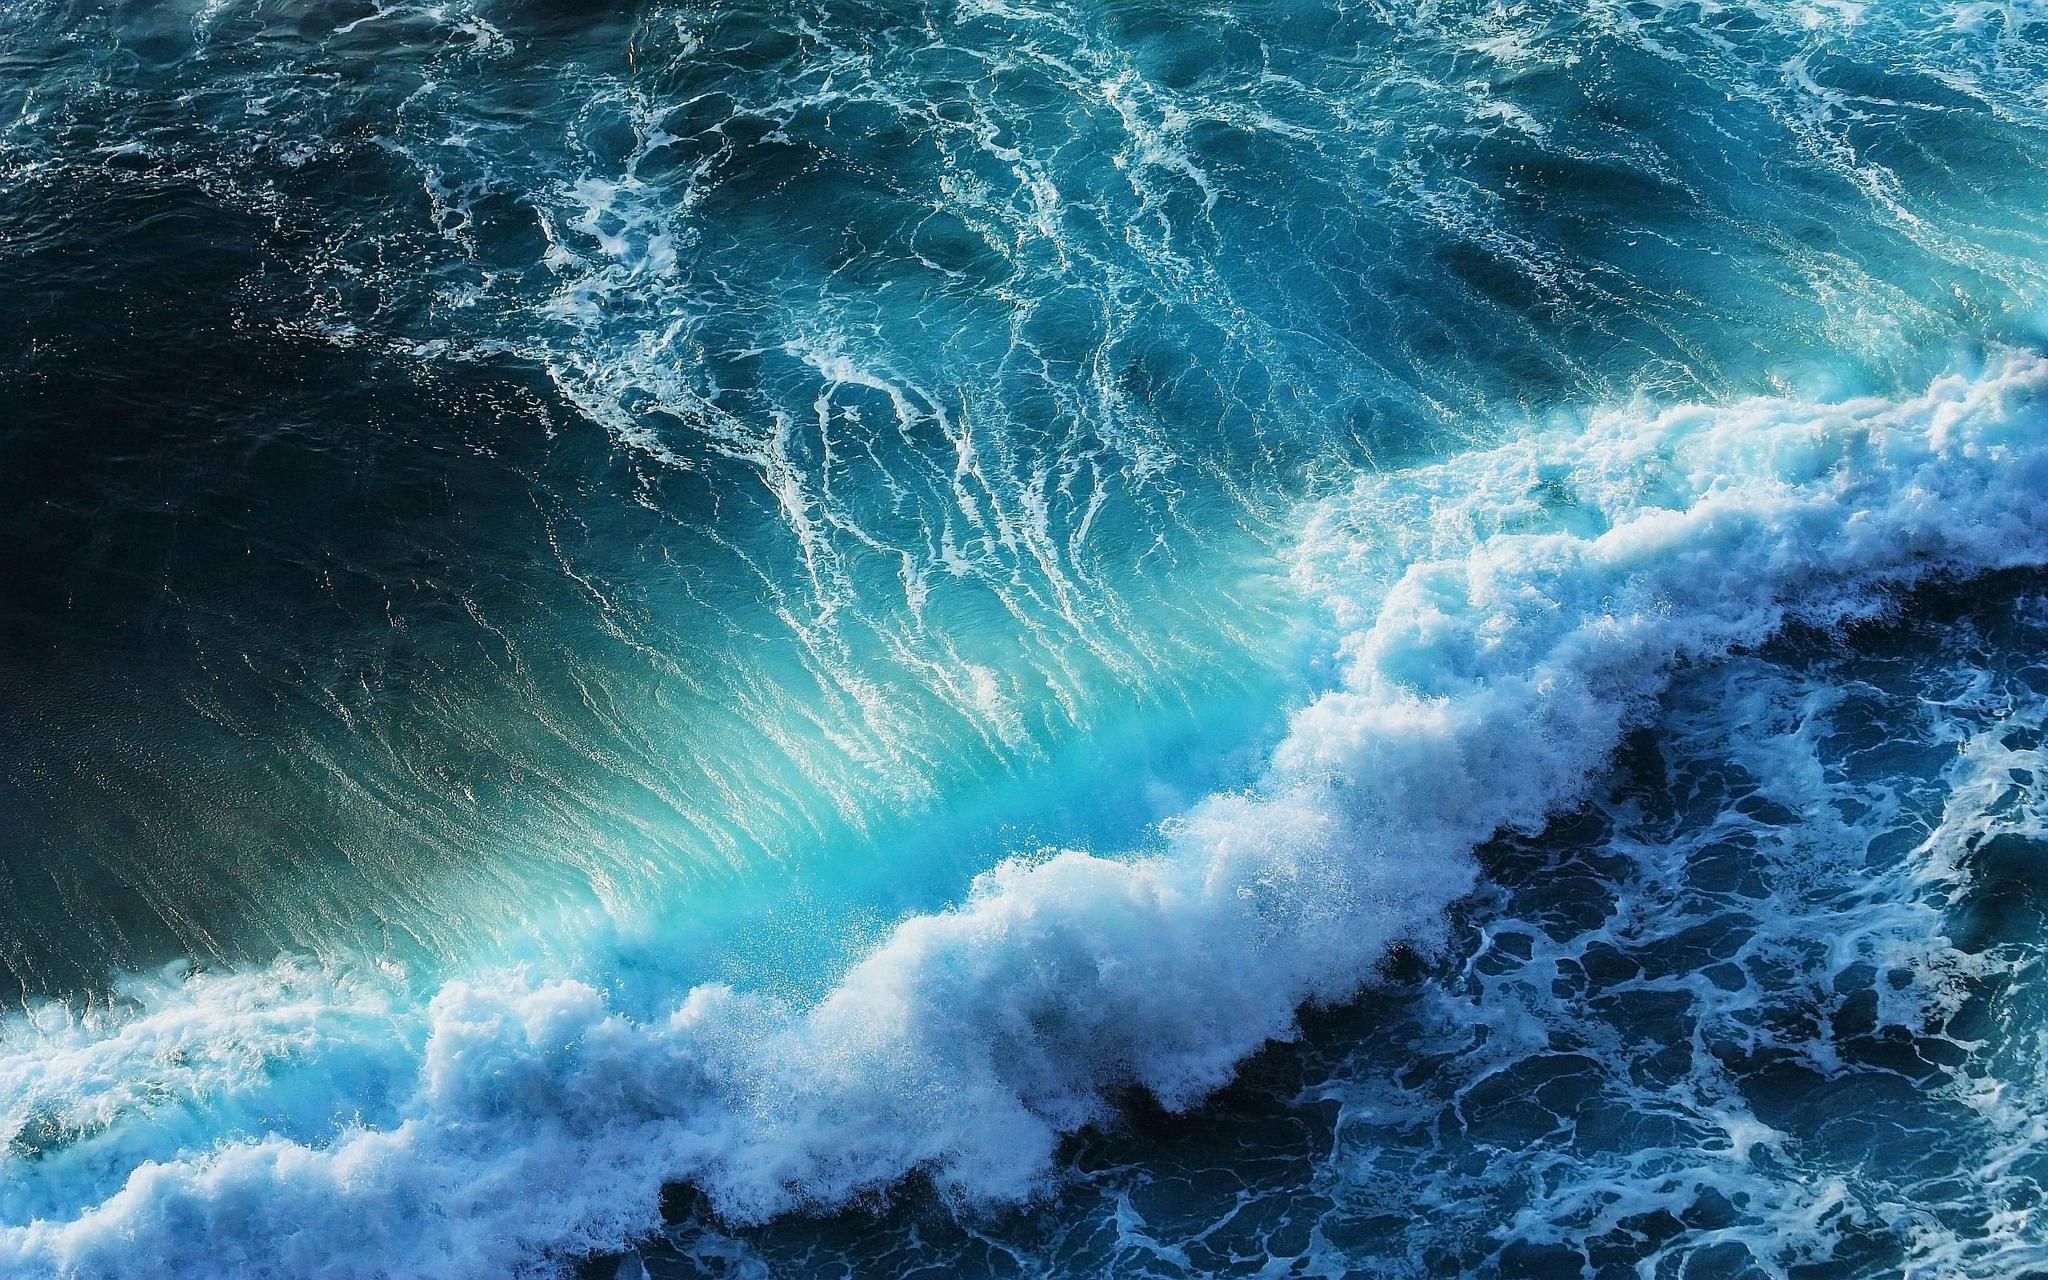 Wave Wallpapers